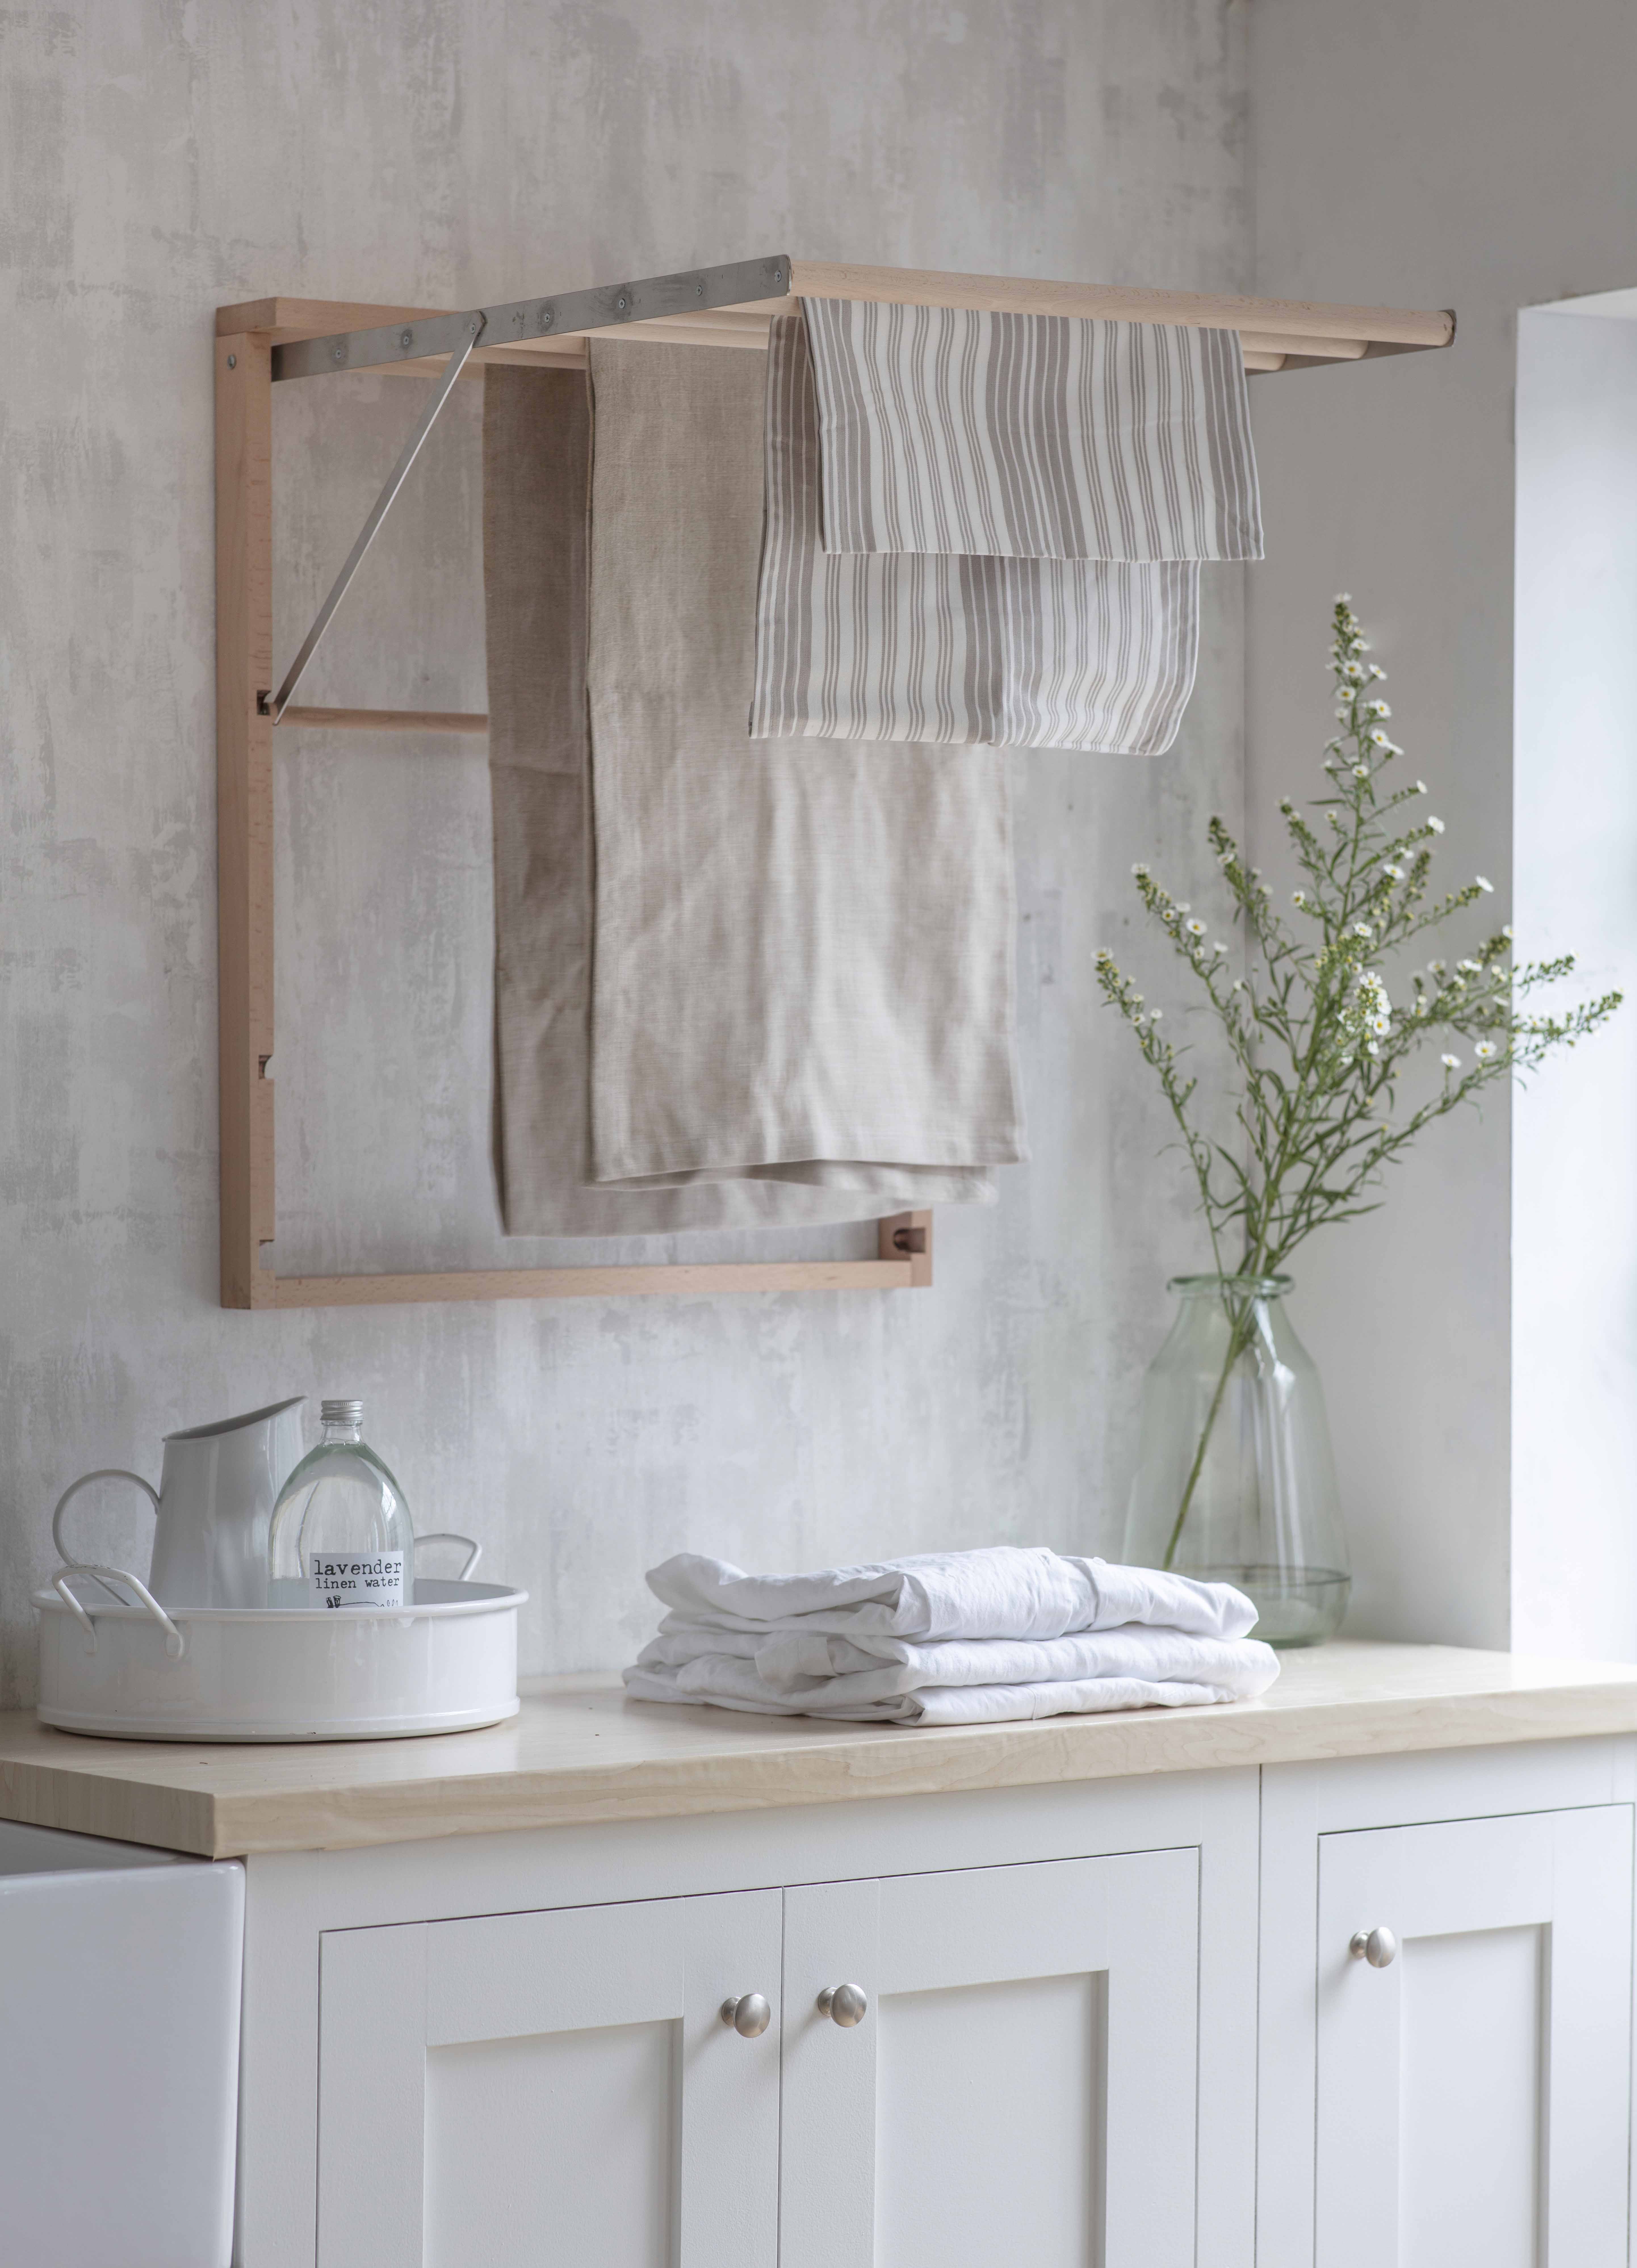 A simple utility room with a muted color scheme and fold-out airers